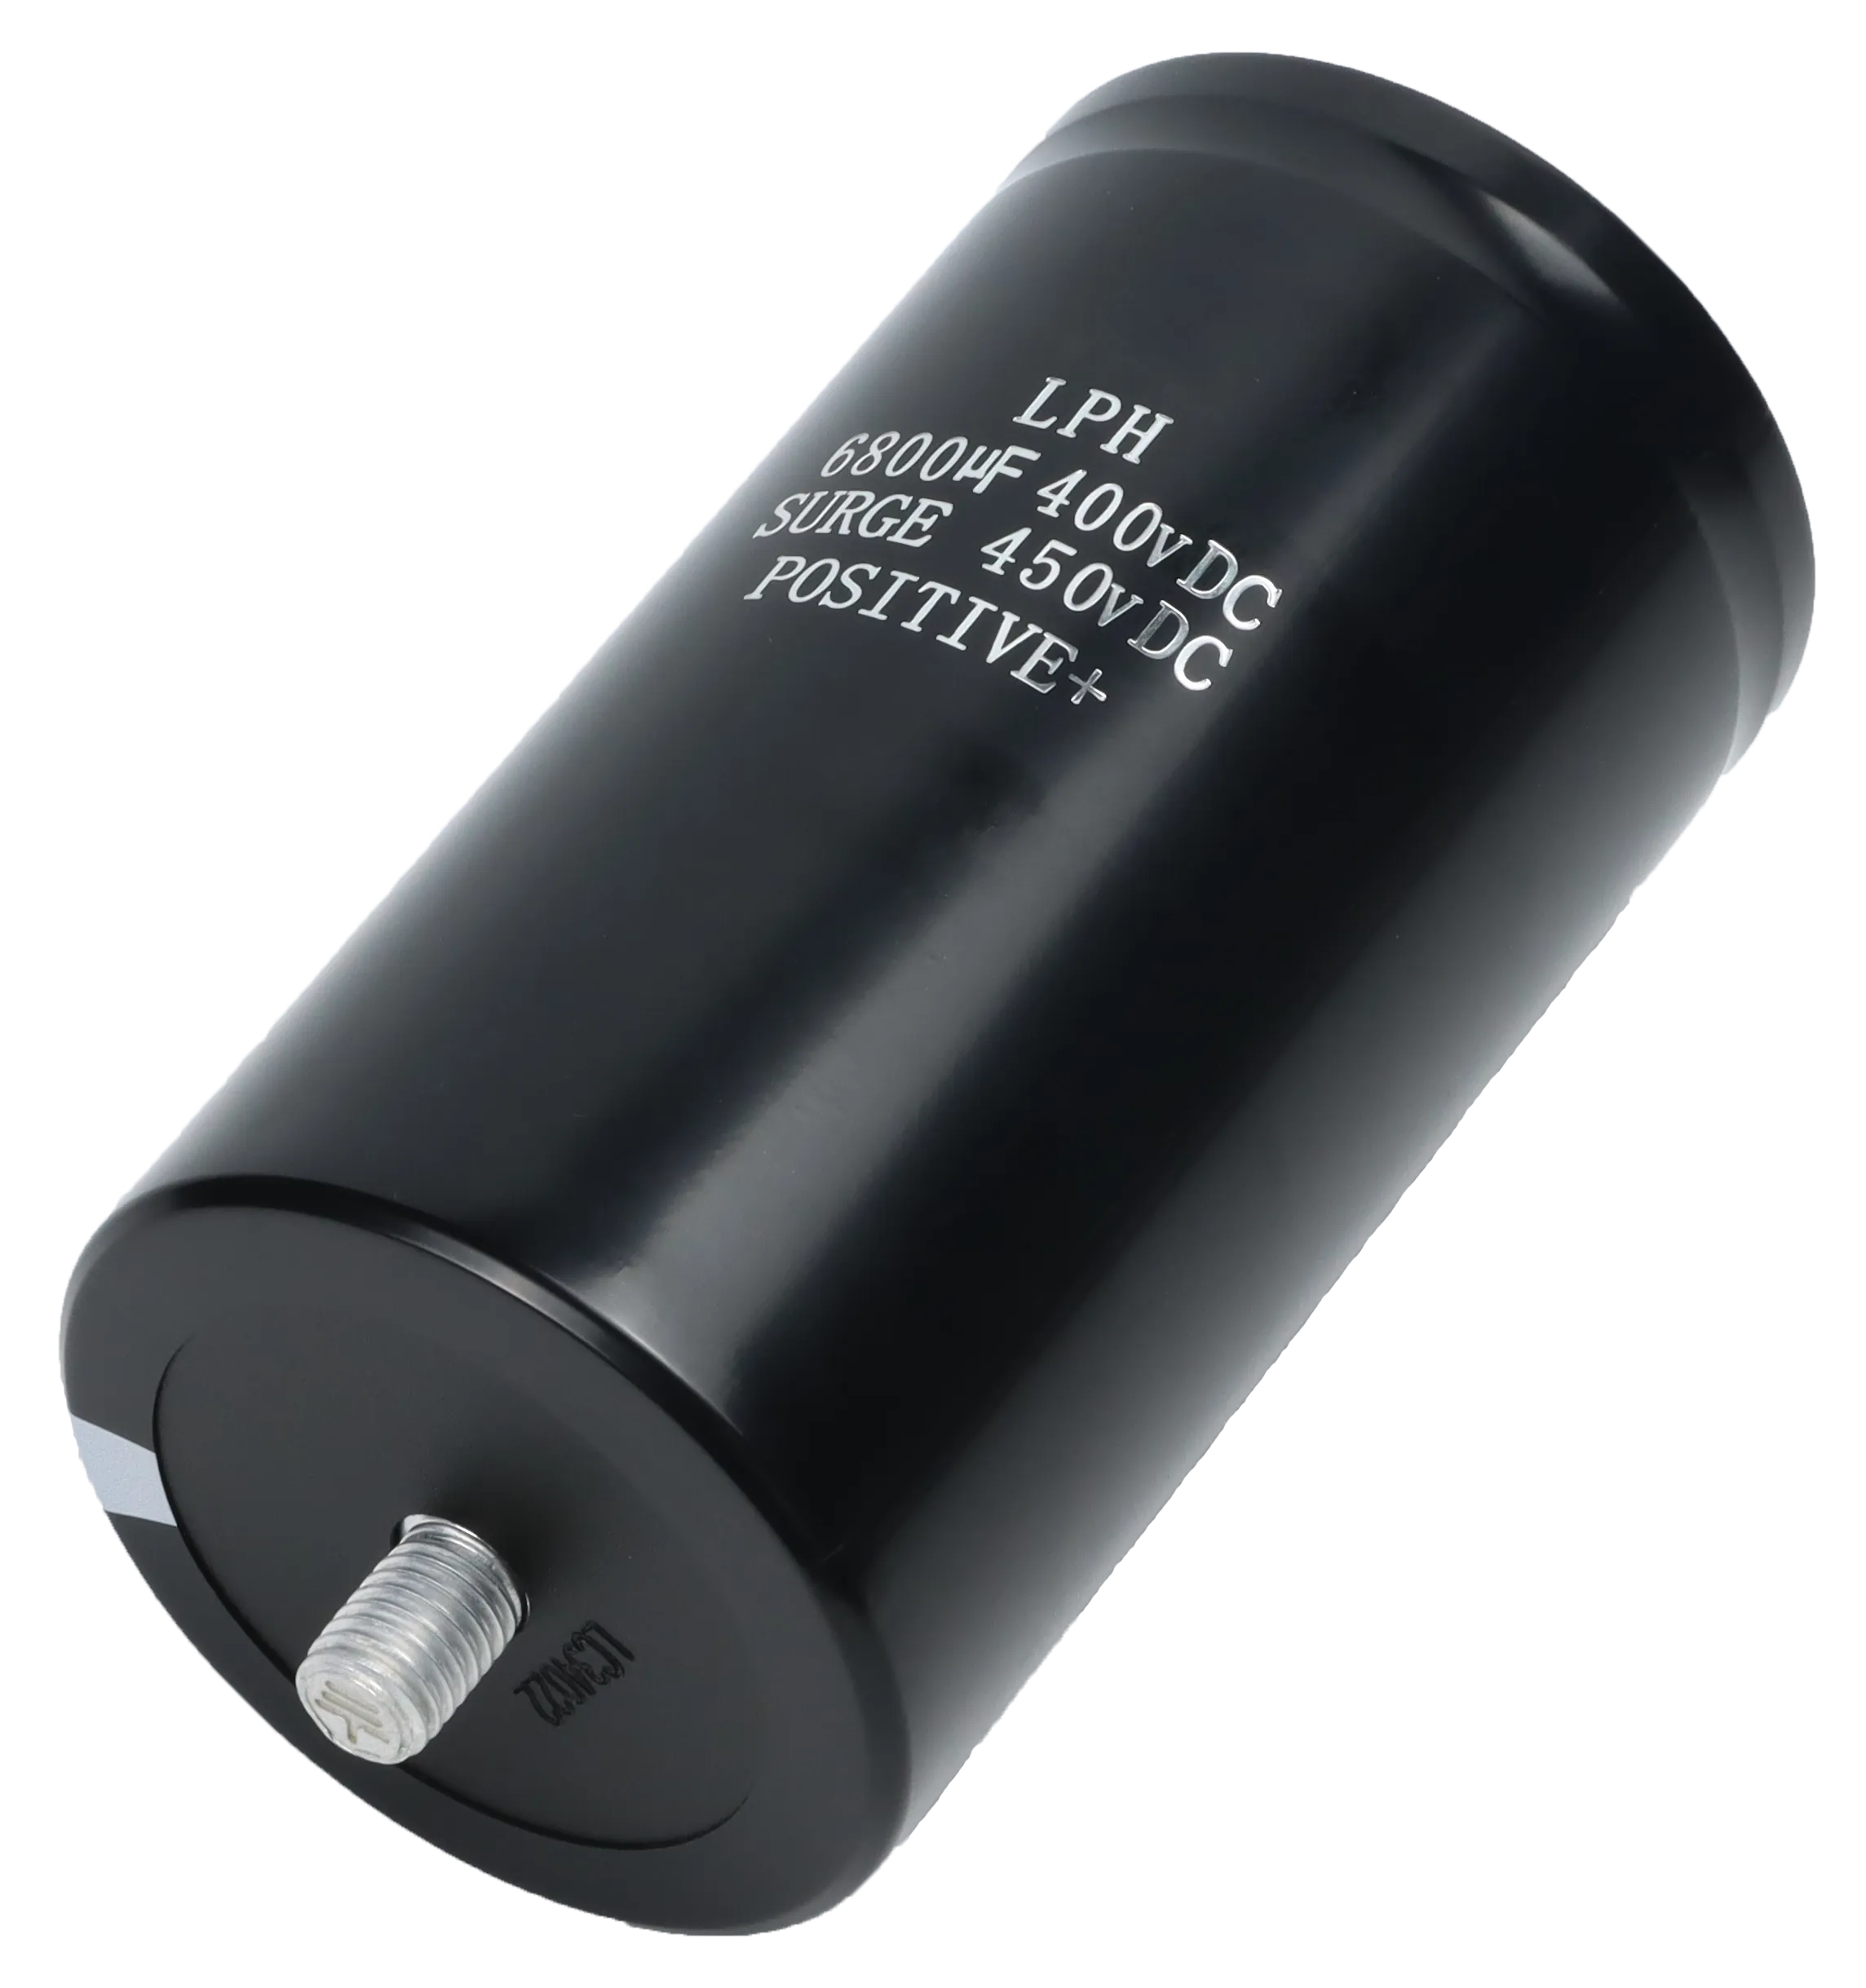 What are large can aluminum electrolytic capacitors?